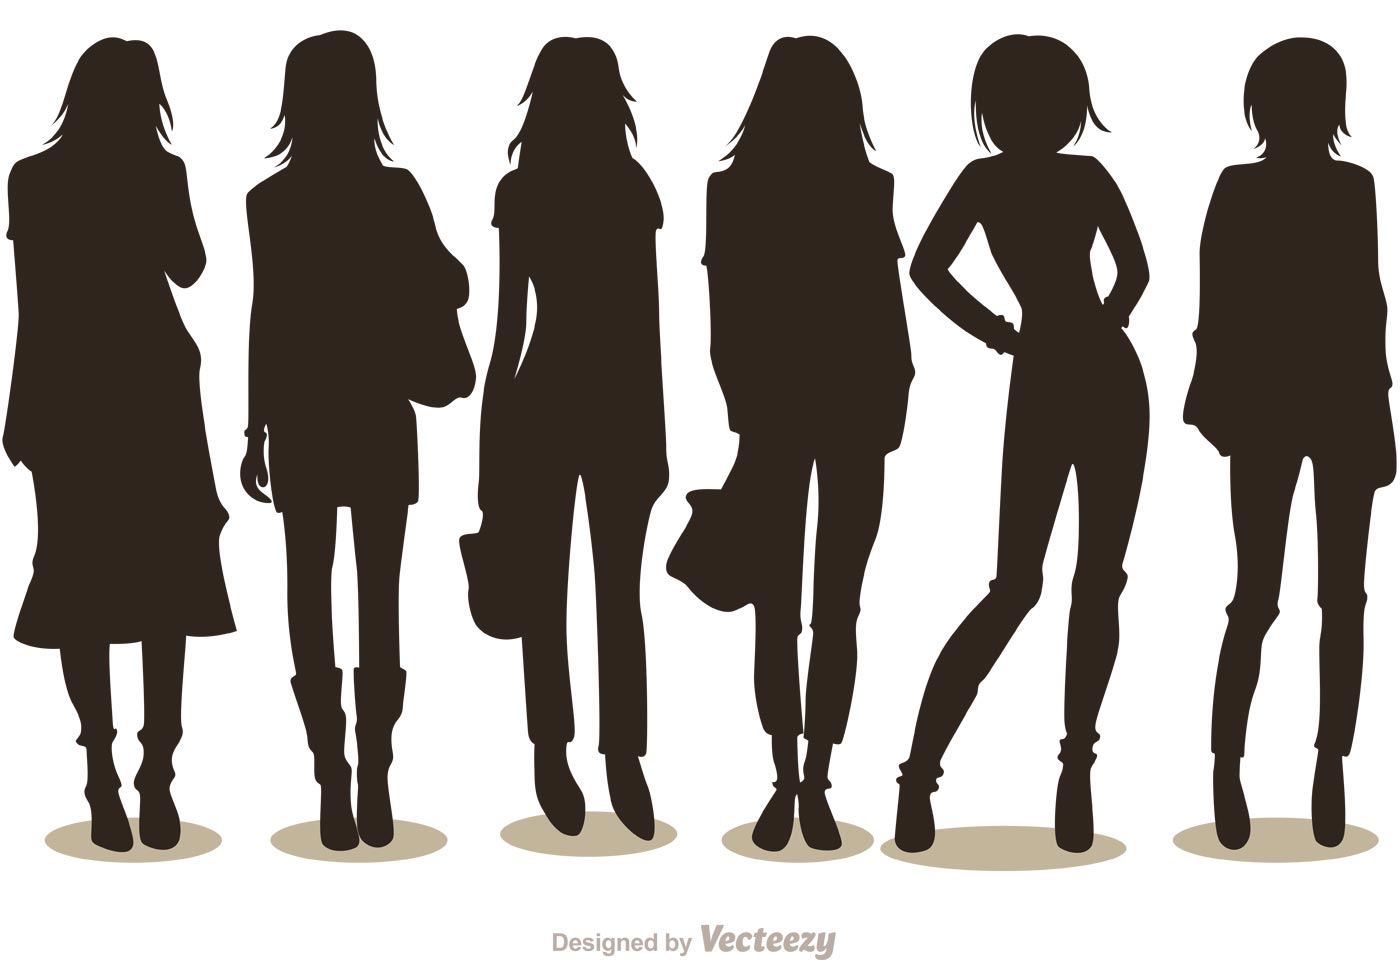 Silhouette Fashion Girl Vectors Pack 1 Download Free Vector Art Stock Graphics And Images